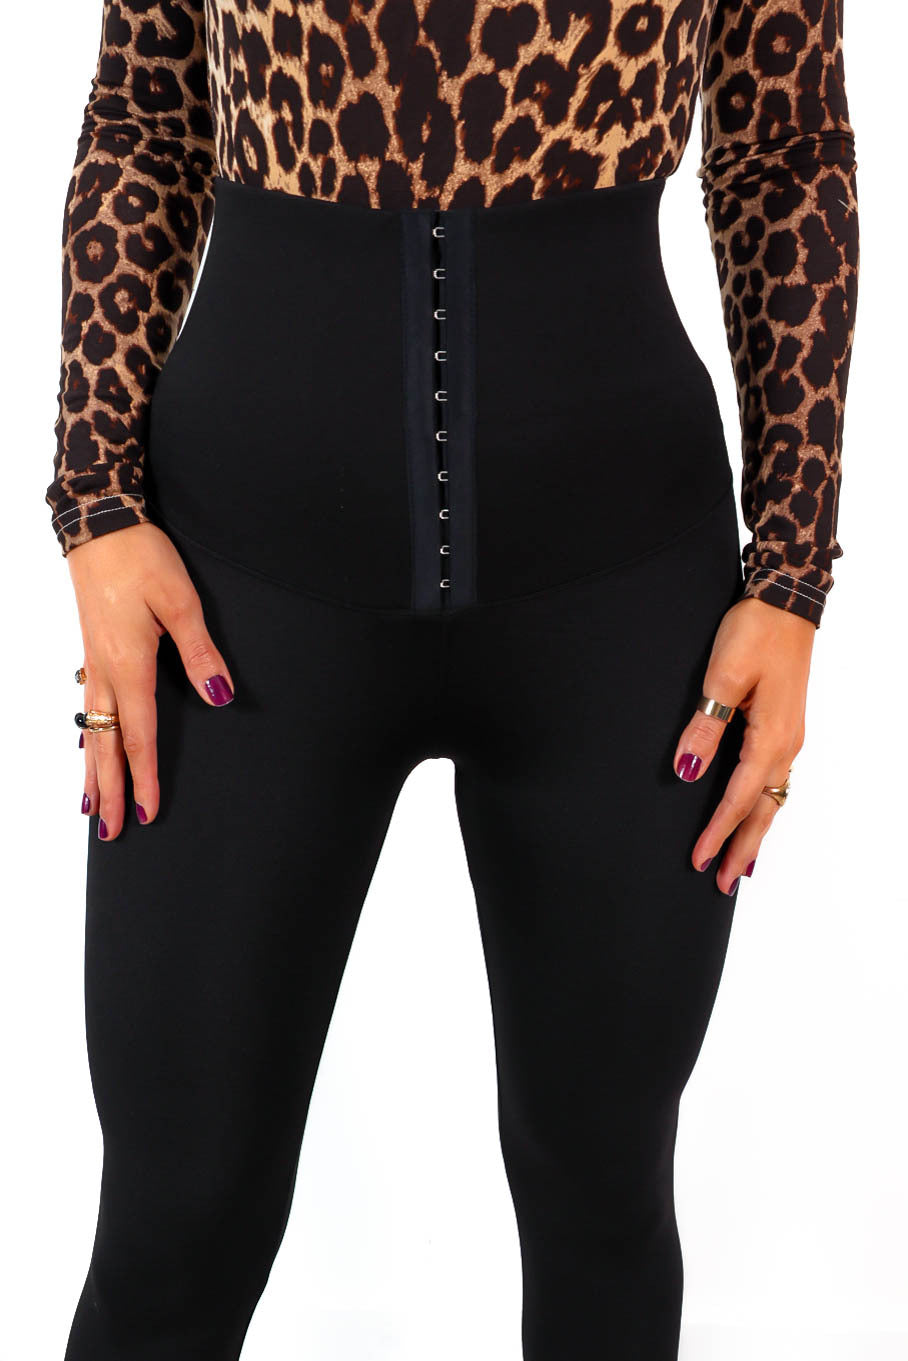 Buy Bellofox High Waist Corset Leggings Ankle Length Tummy Control  Stretchable Yoga Pants SIZE XL Online at Best Prices in India - JioMart.